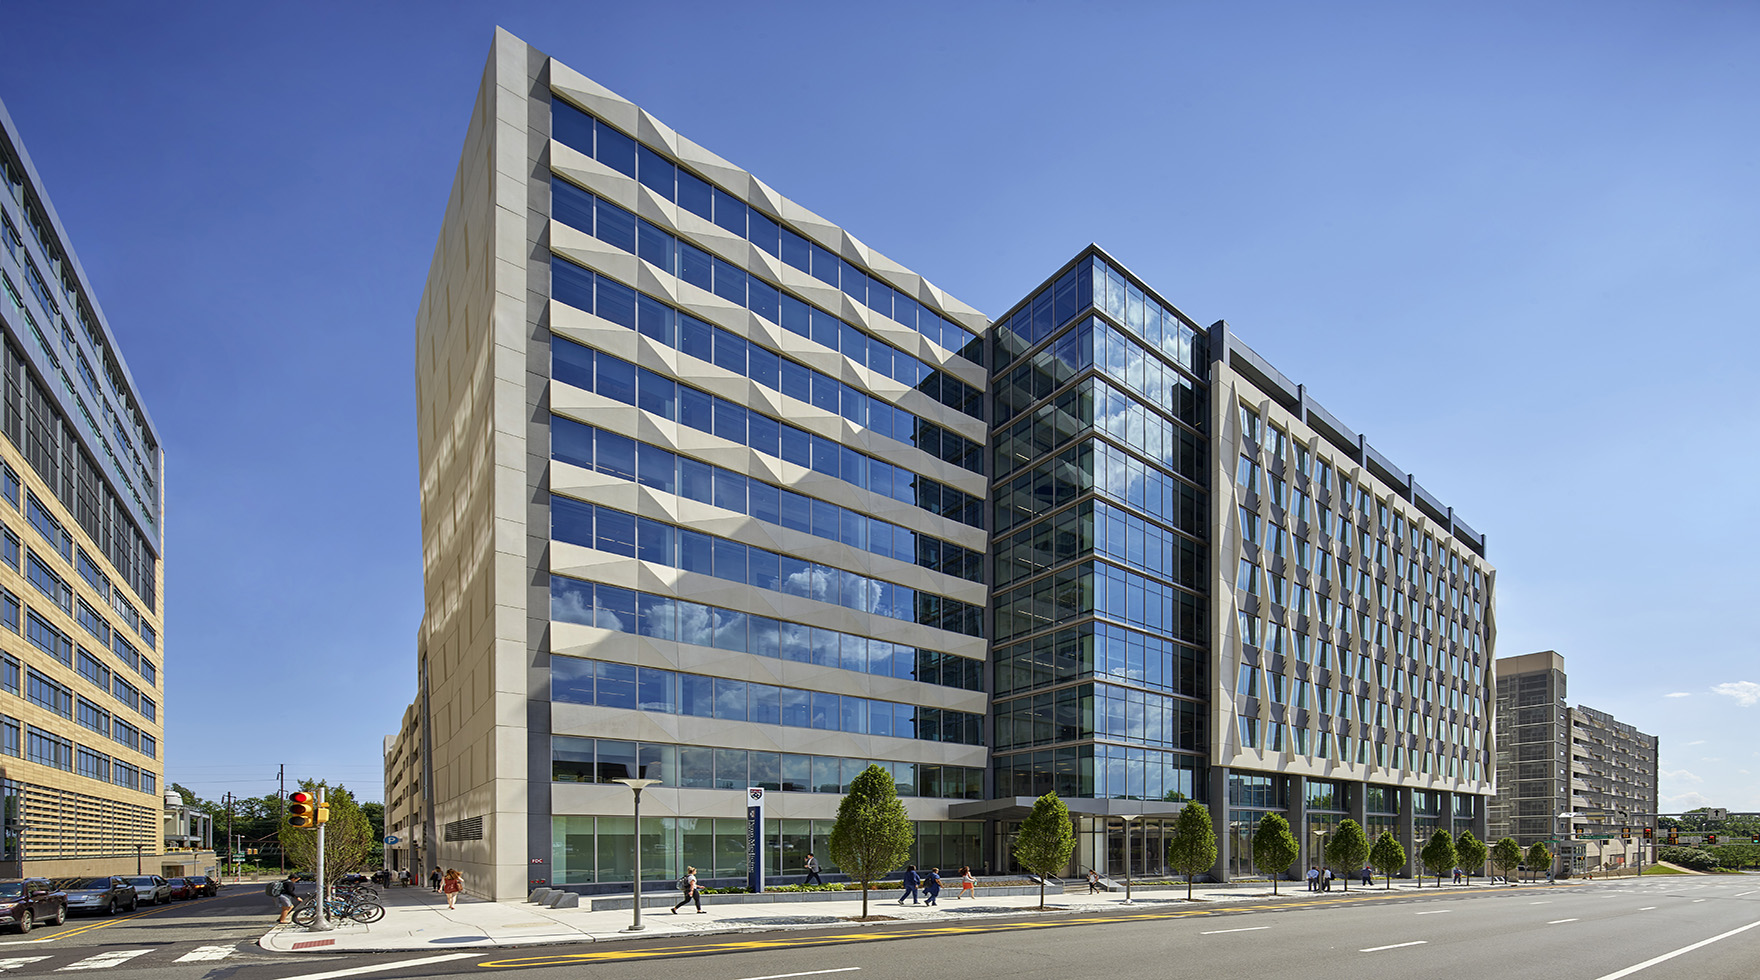 The exterior of a 10-story office tower for Penn Medicine featuring precast panels framing floor-to-ceiling glass on a street lined with trees in Philadelphia.